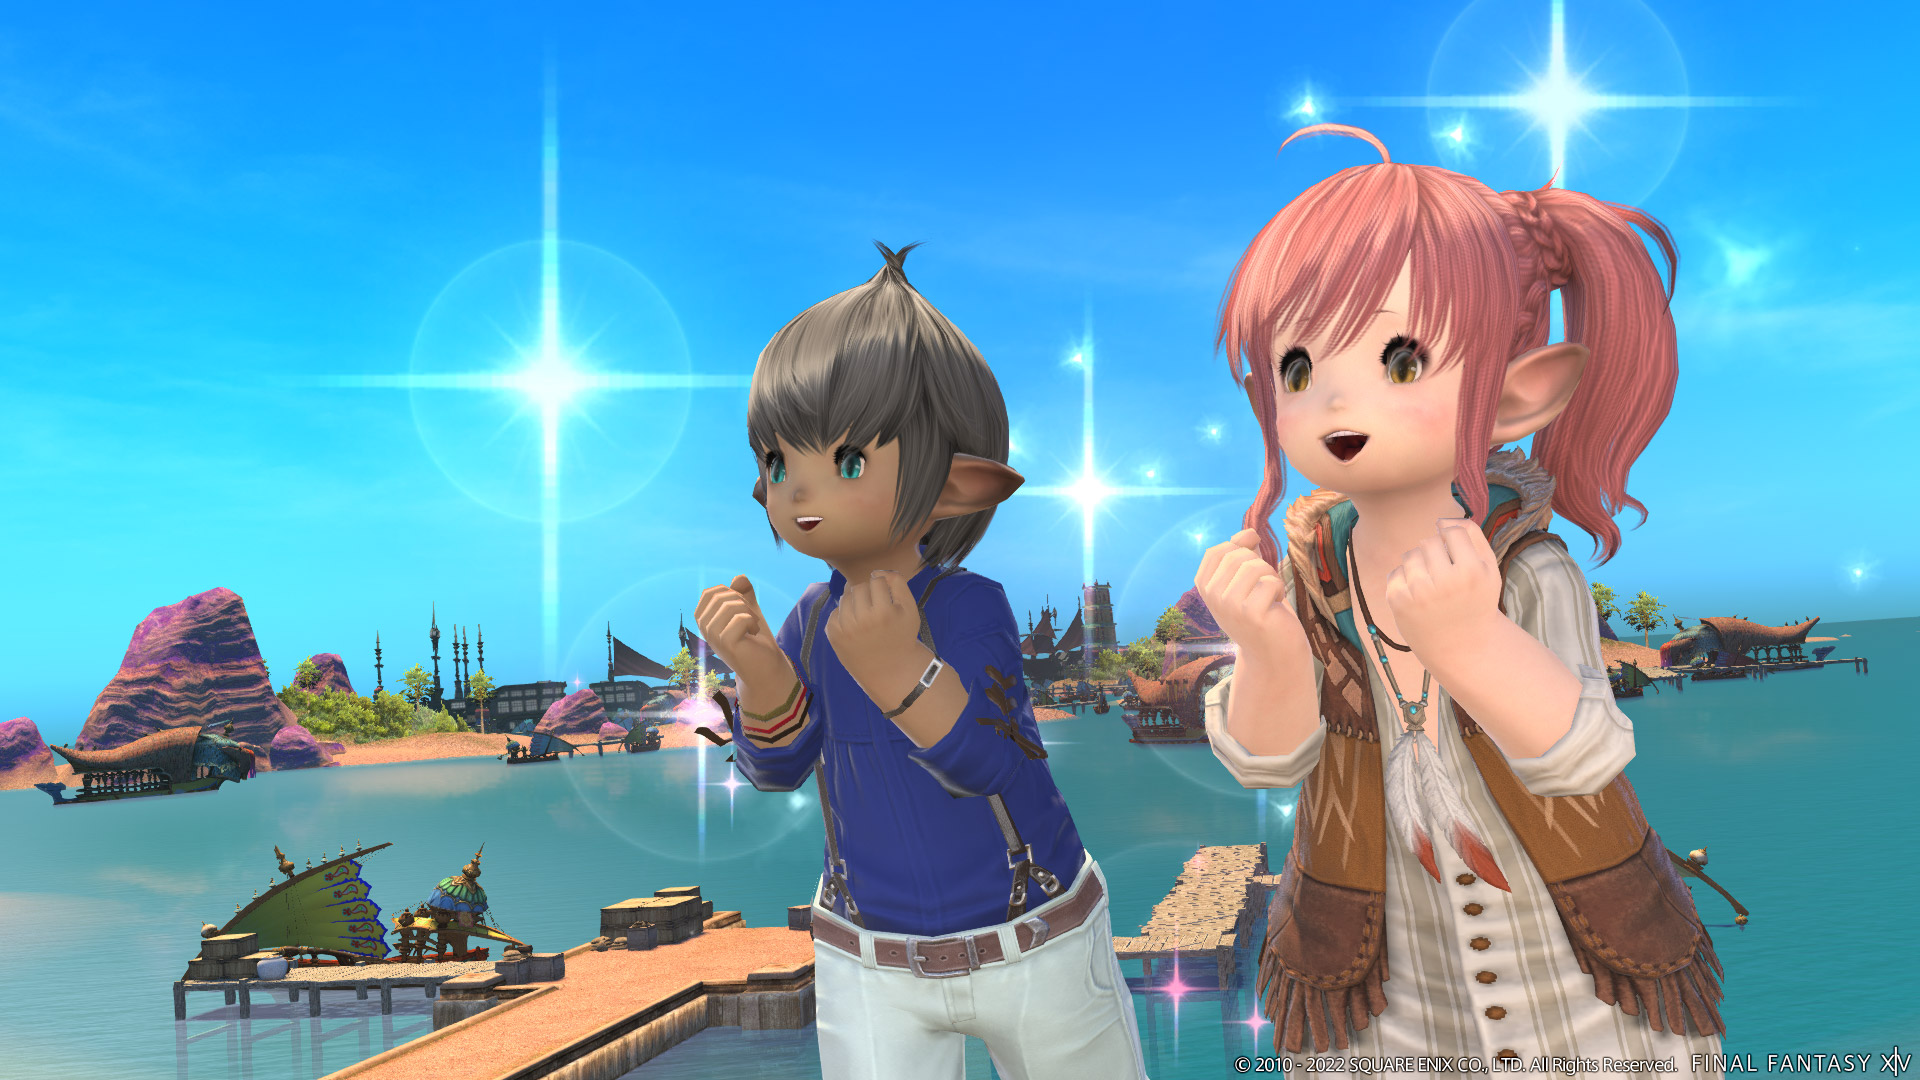 Where to new content and features in Final Fantasy XIV 6.25 - Crystallis